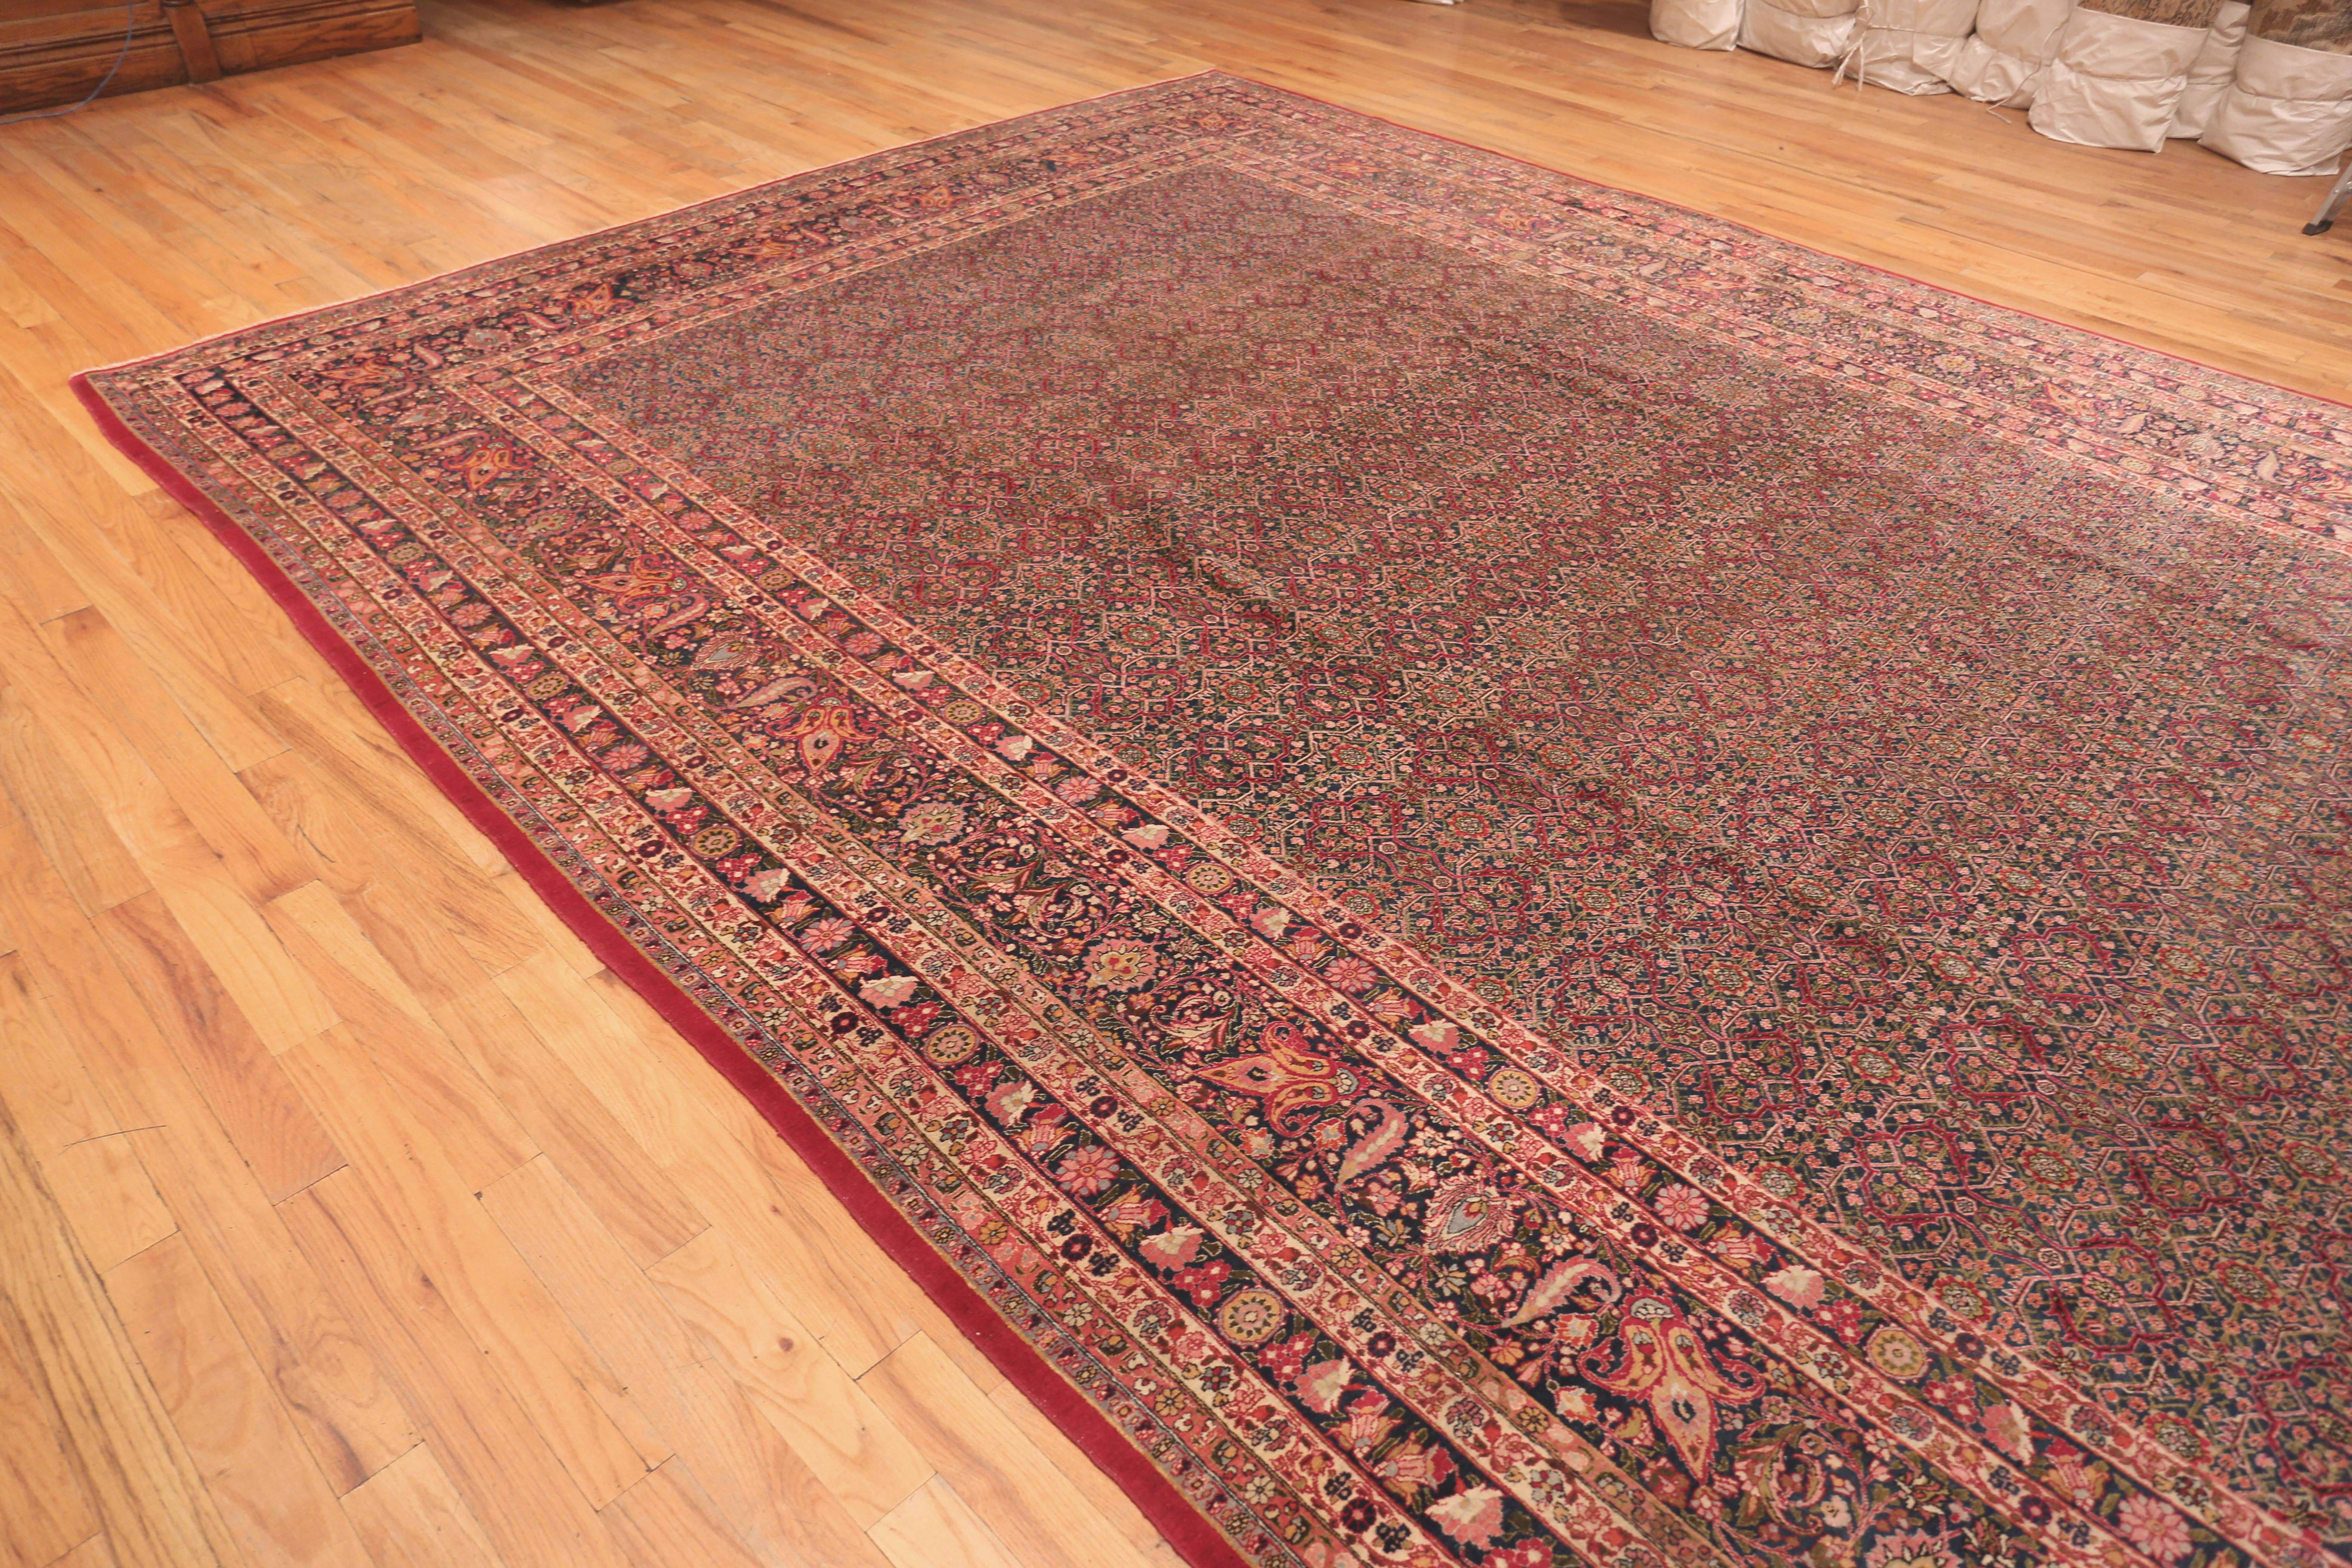 Large Antique Persian Khorassan Rug, Country of origin, Persia, Circa date: 1920. Size: 11 ft 5 in x 16 ft 7 in (3.48 m x 5.05 m)
 